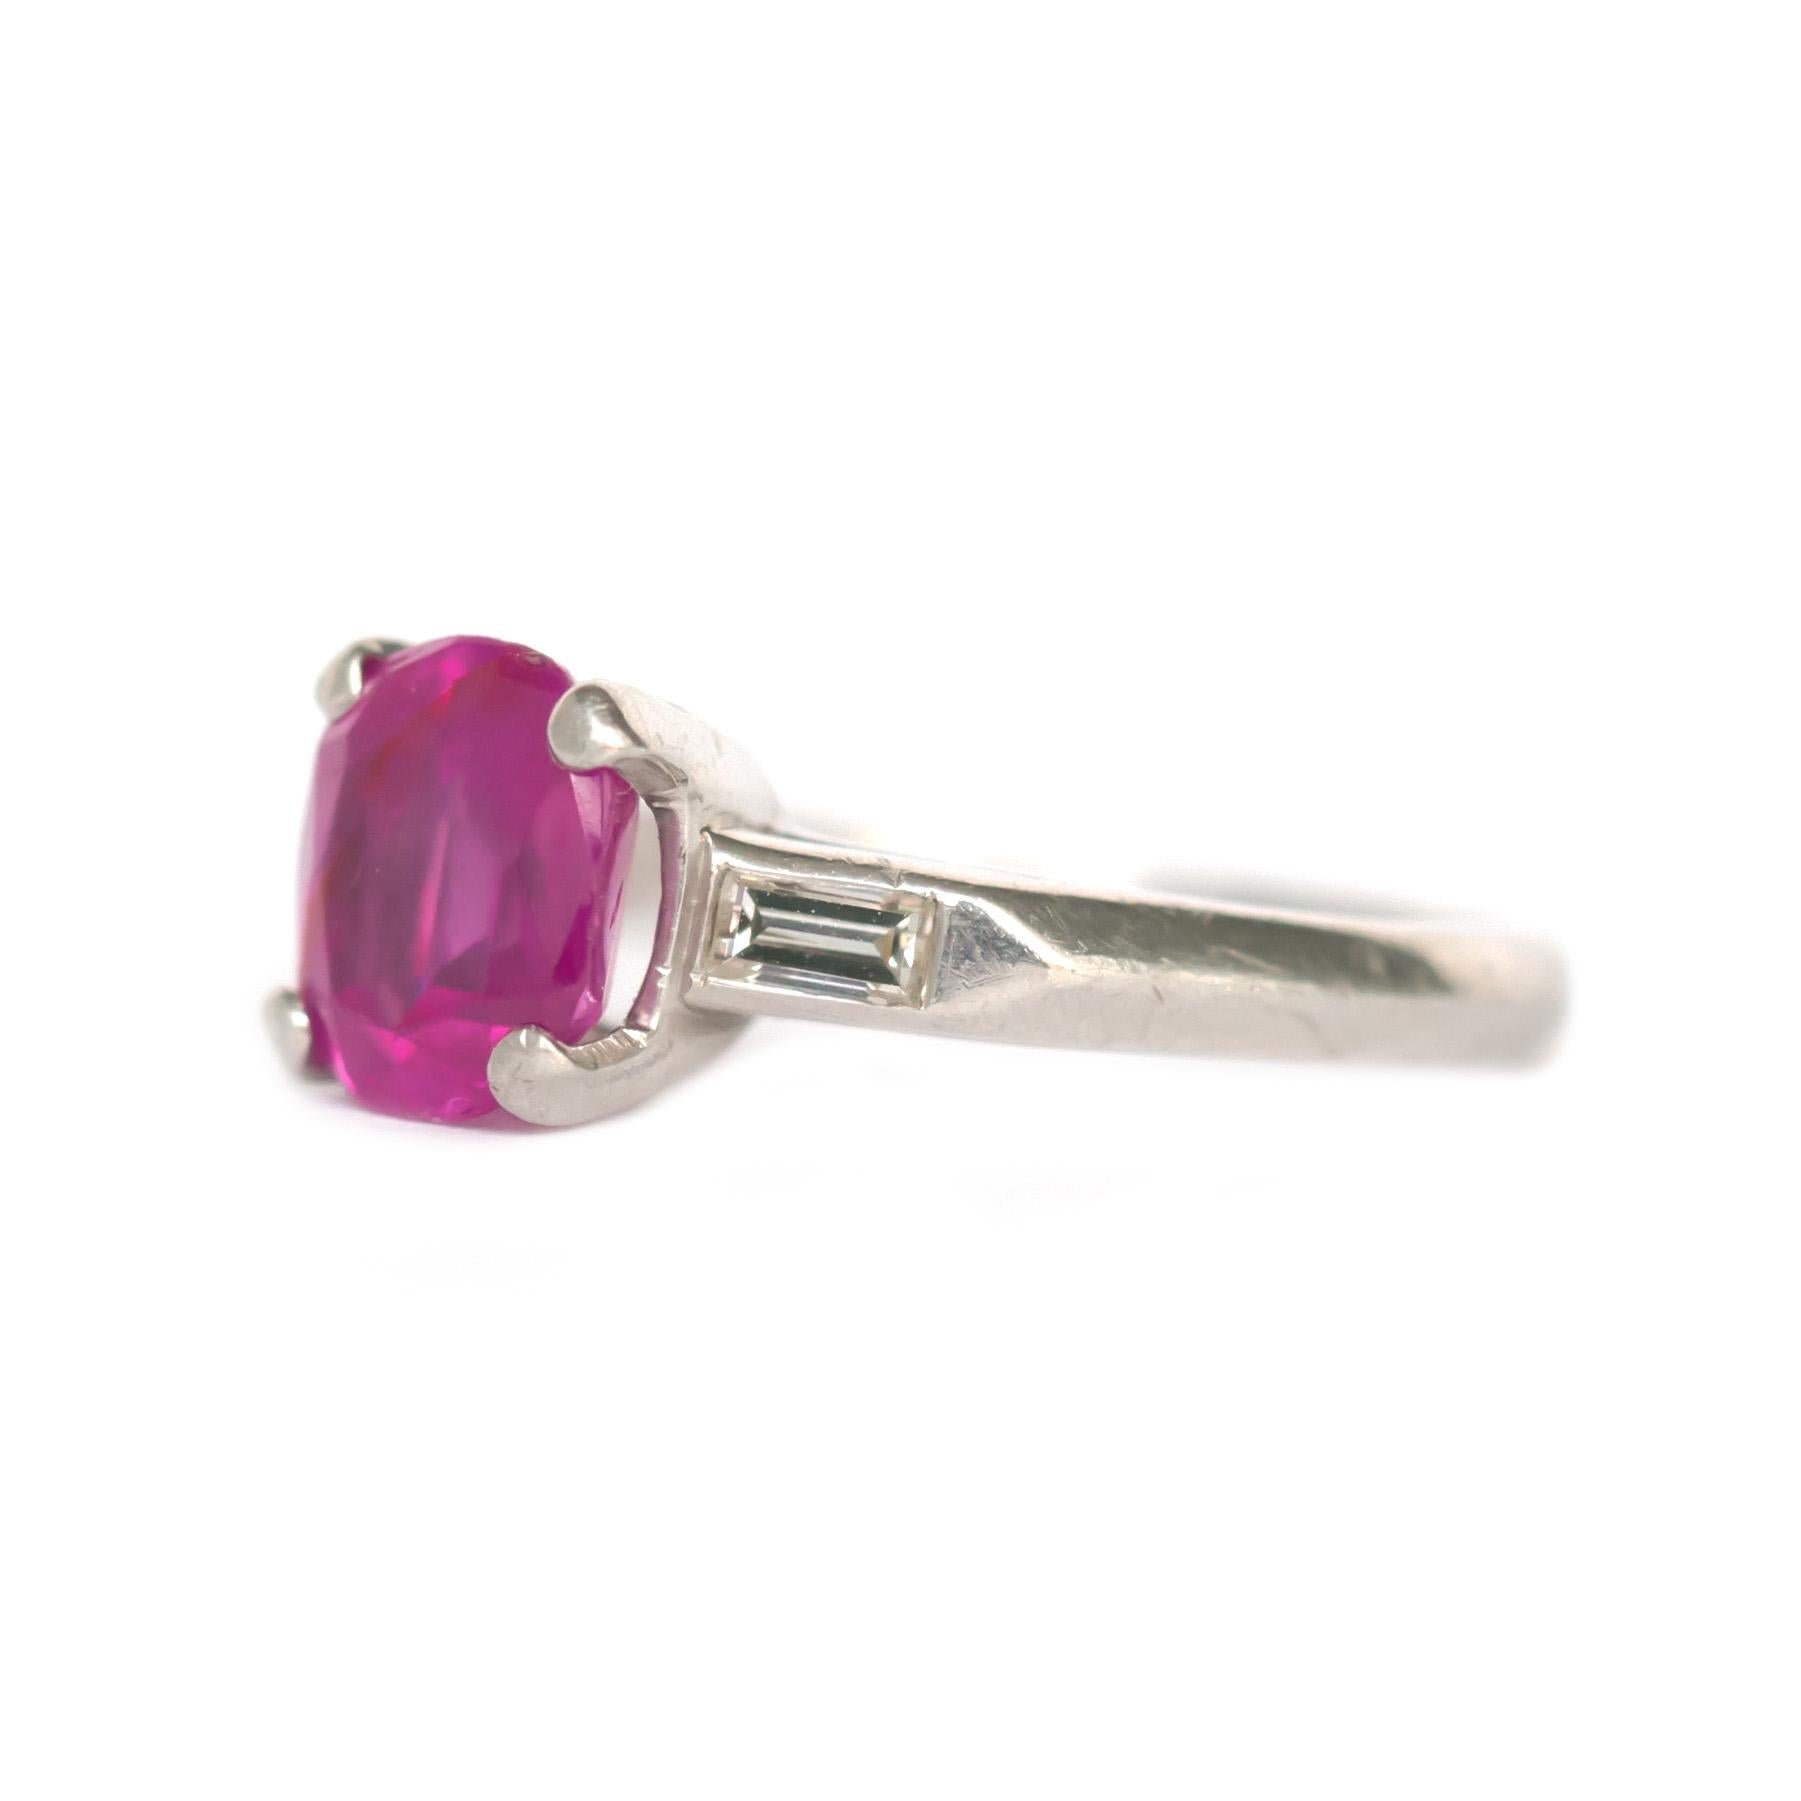 Ring Size: 4.5
Metal Type: Platinum [Hallmarked, and Tested]
Weight: 3.8  grams

Center Sapphire Details:
Weight: 1.40 carat
Cut: Old Cushion 
Color: Intense Pink
Clarity: SI
Treatment: Unheated

Side Diamond Details:
Weight: .15 carat, total